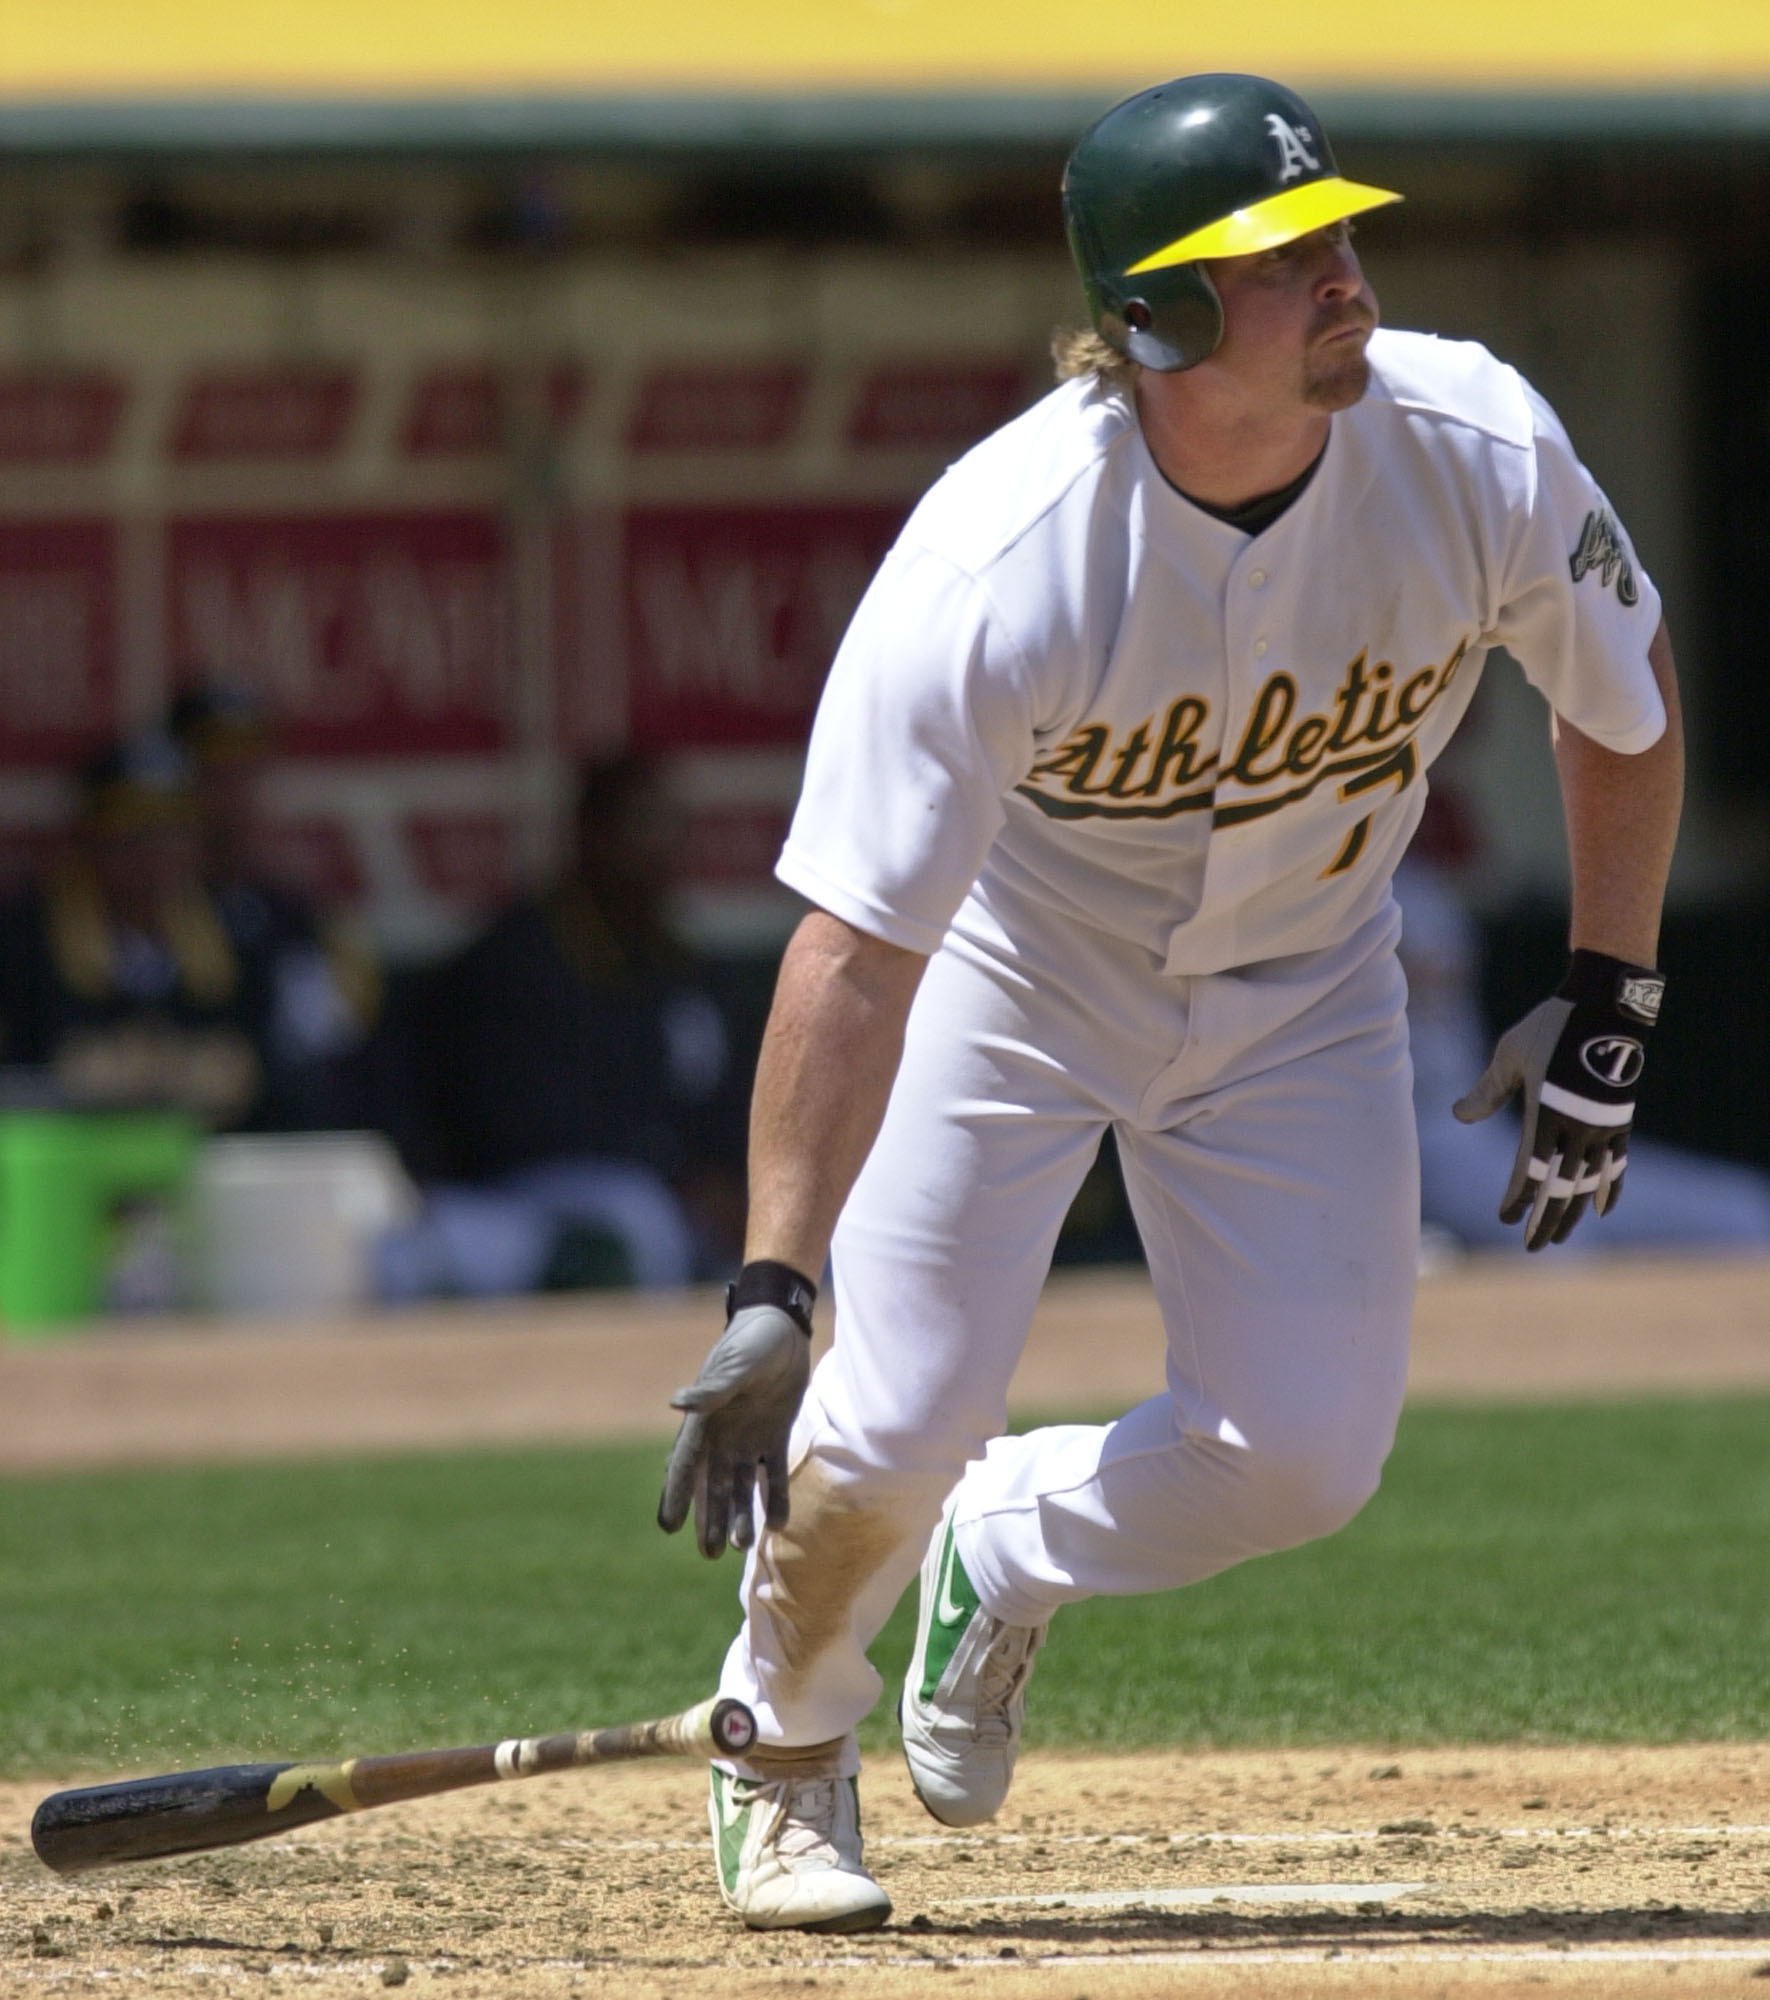 Jeremy Giambi, former Oakland Athletics outfielder, dies at age 47